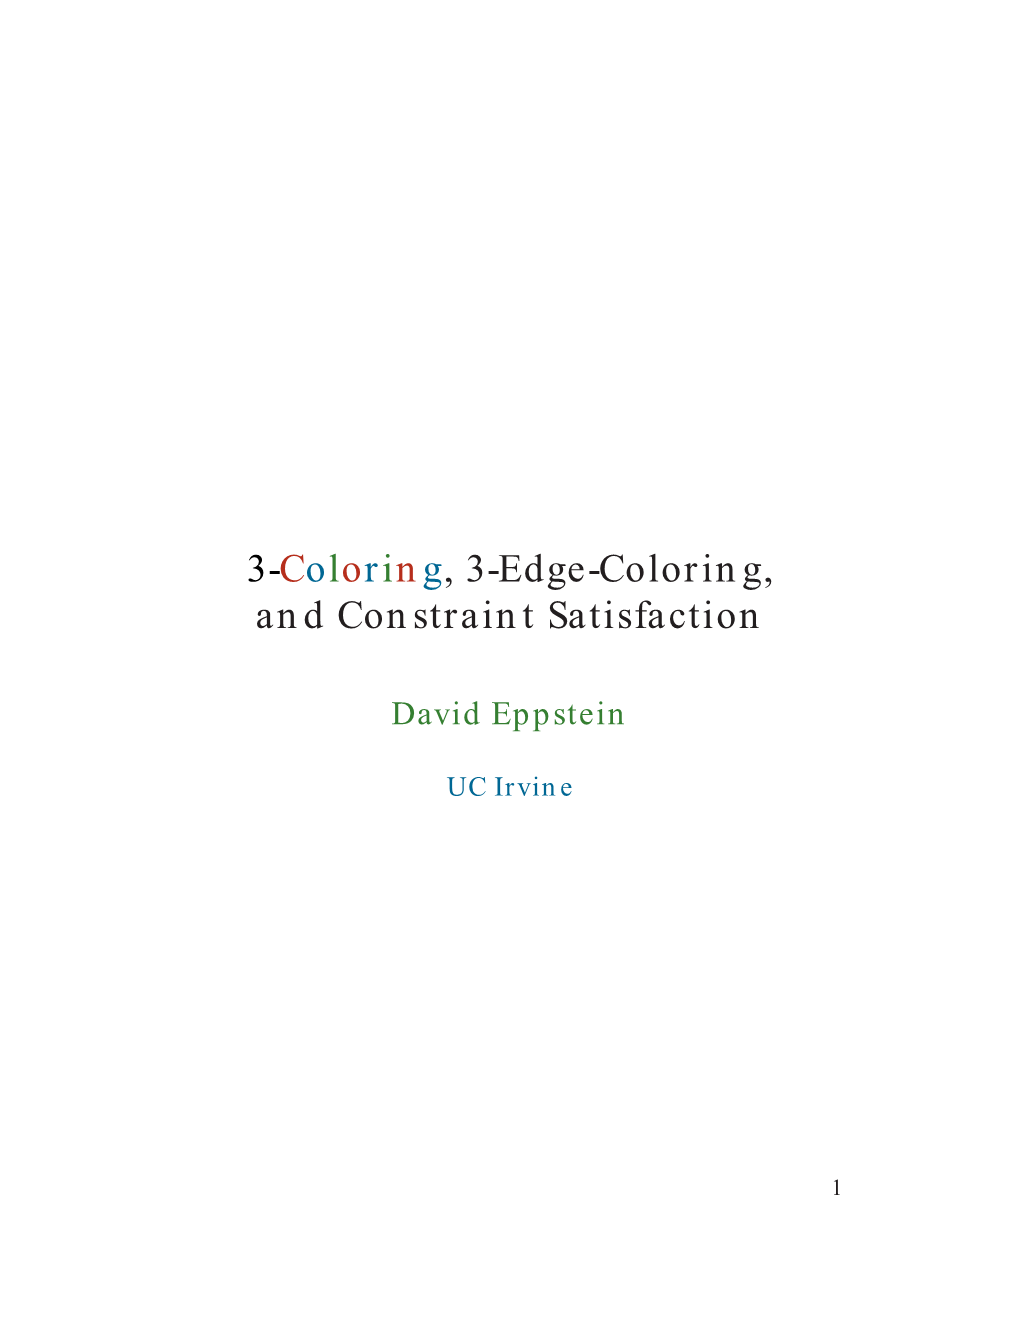 3-Coloring, 3-Edge-Coloring, and Constraint Satisfaction